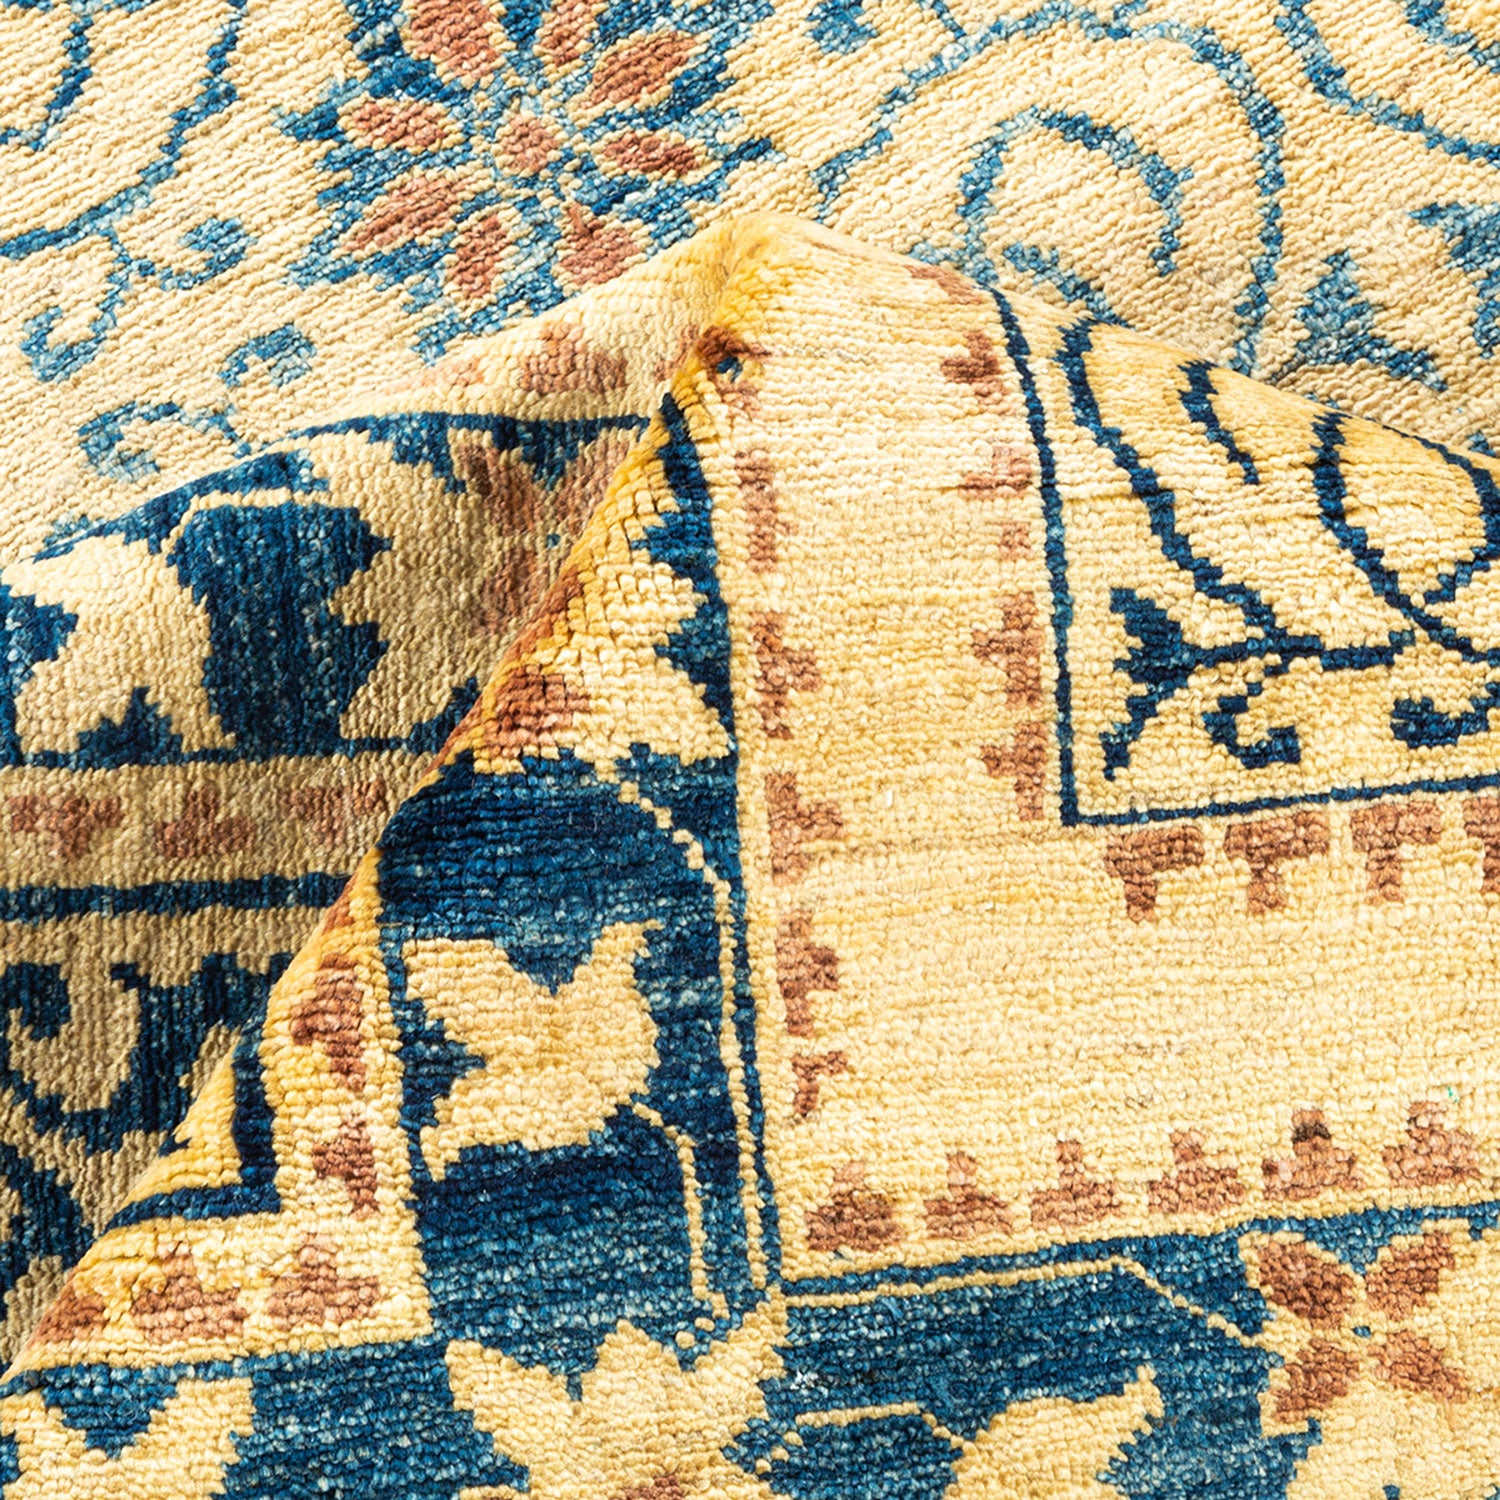 Close-up of a handcrafted rug with intricate patterns in blue and tan.